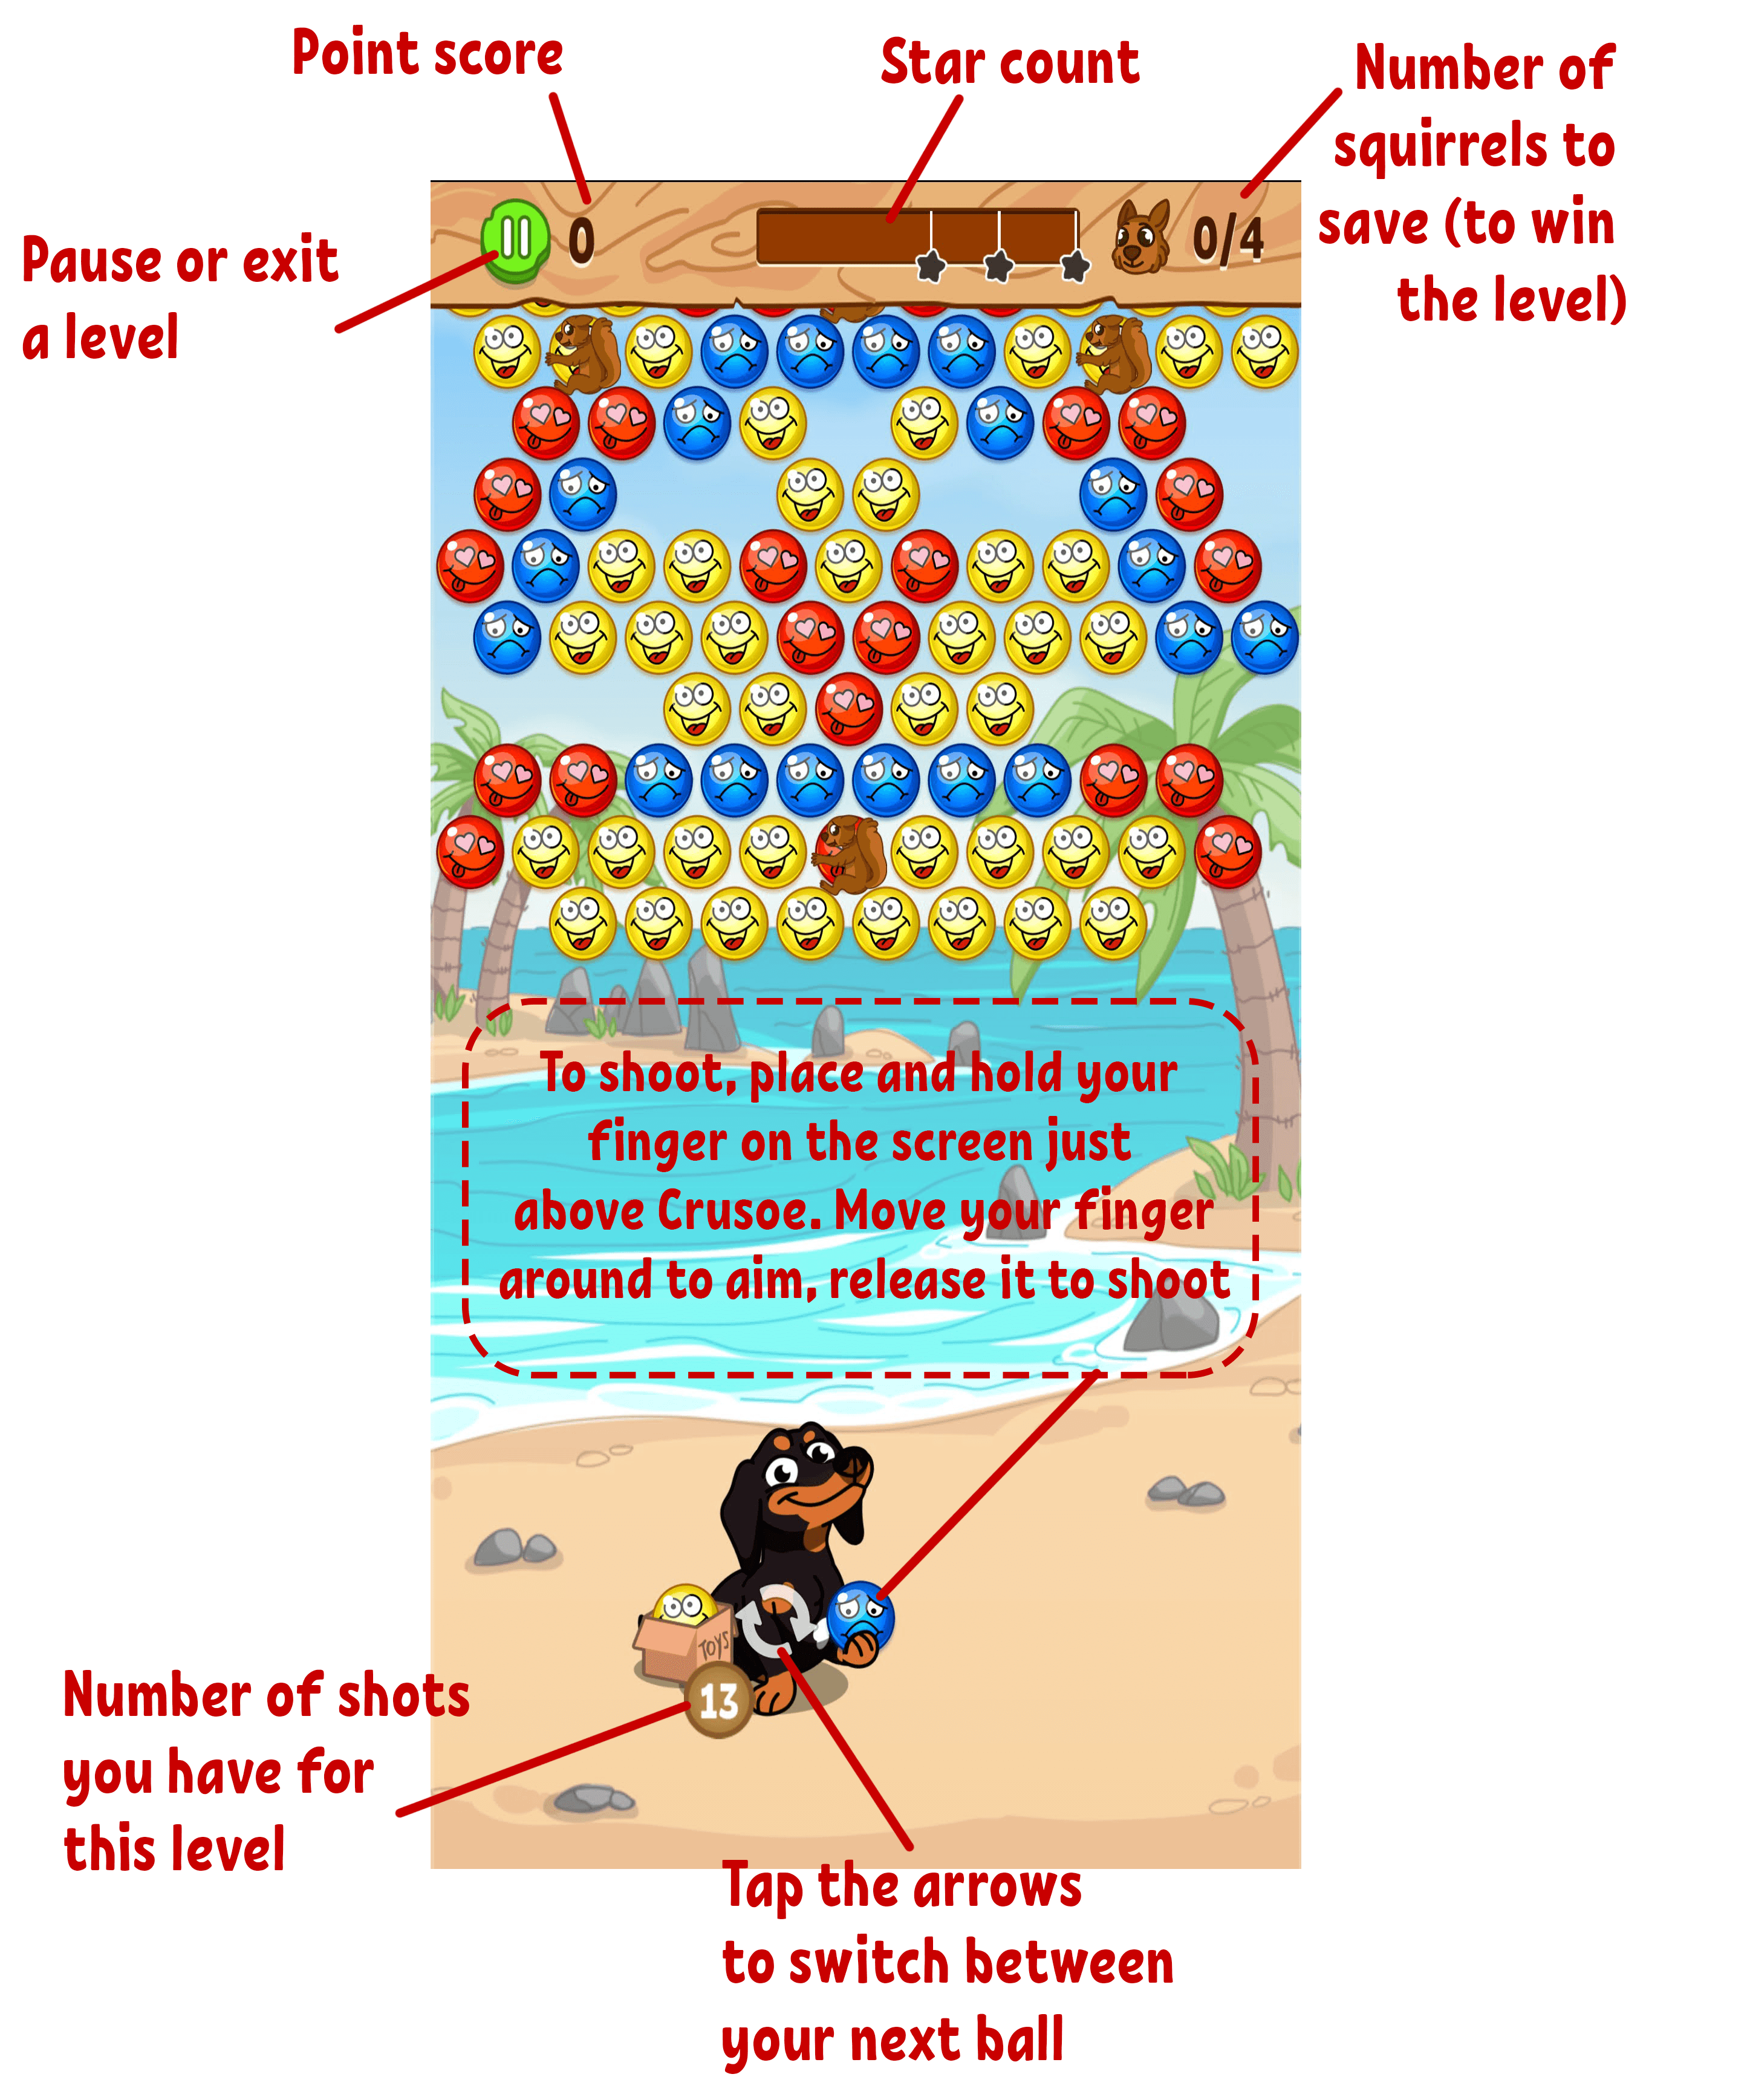 Crusoe's Squeaky Ball POP - gameplay guide